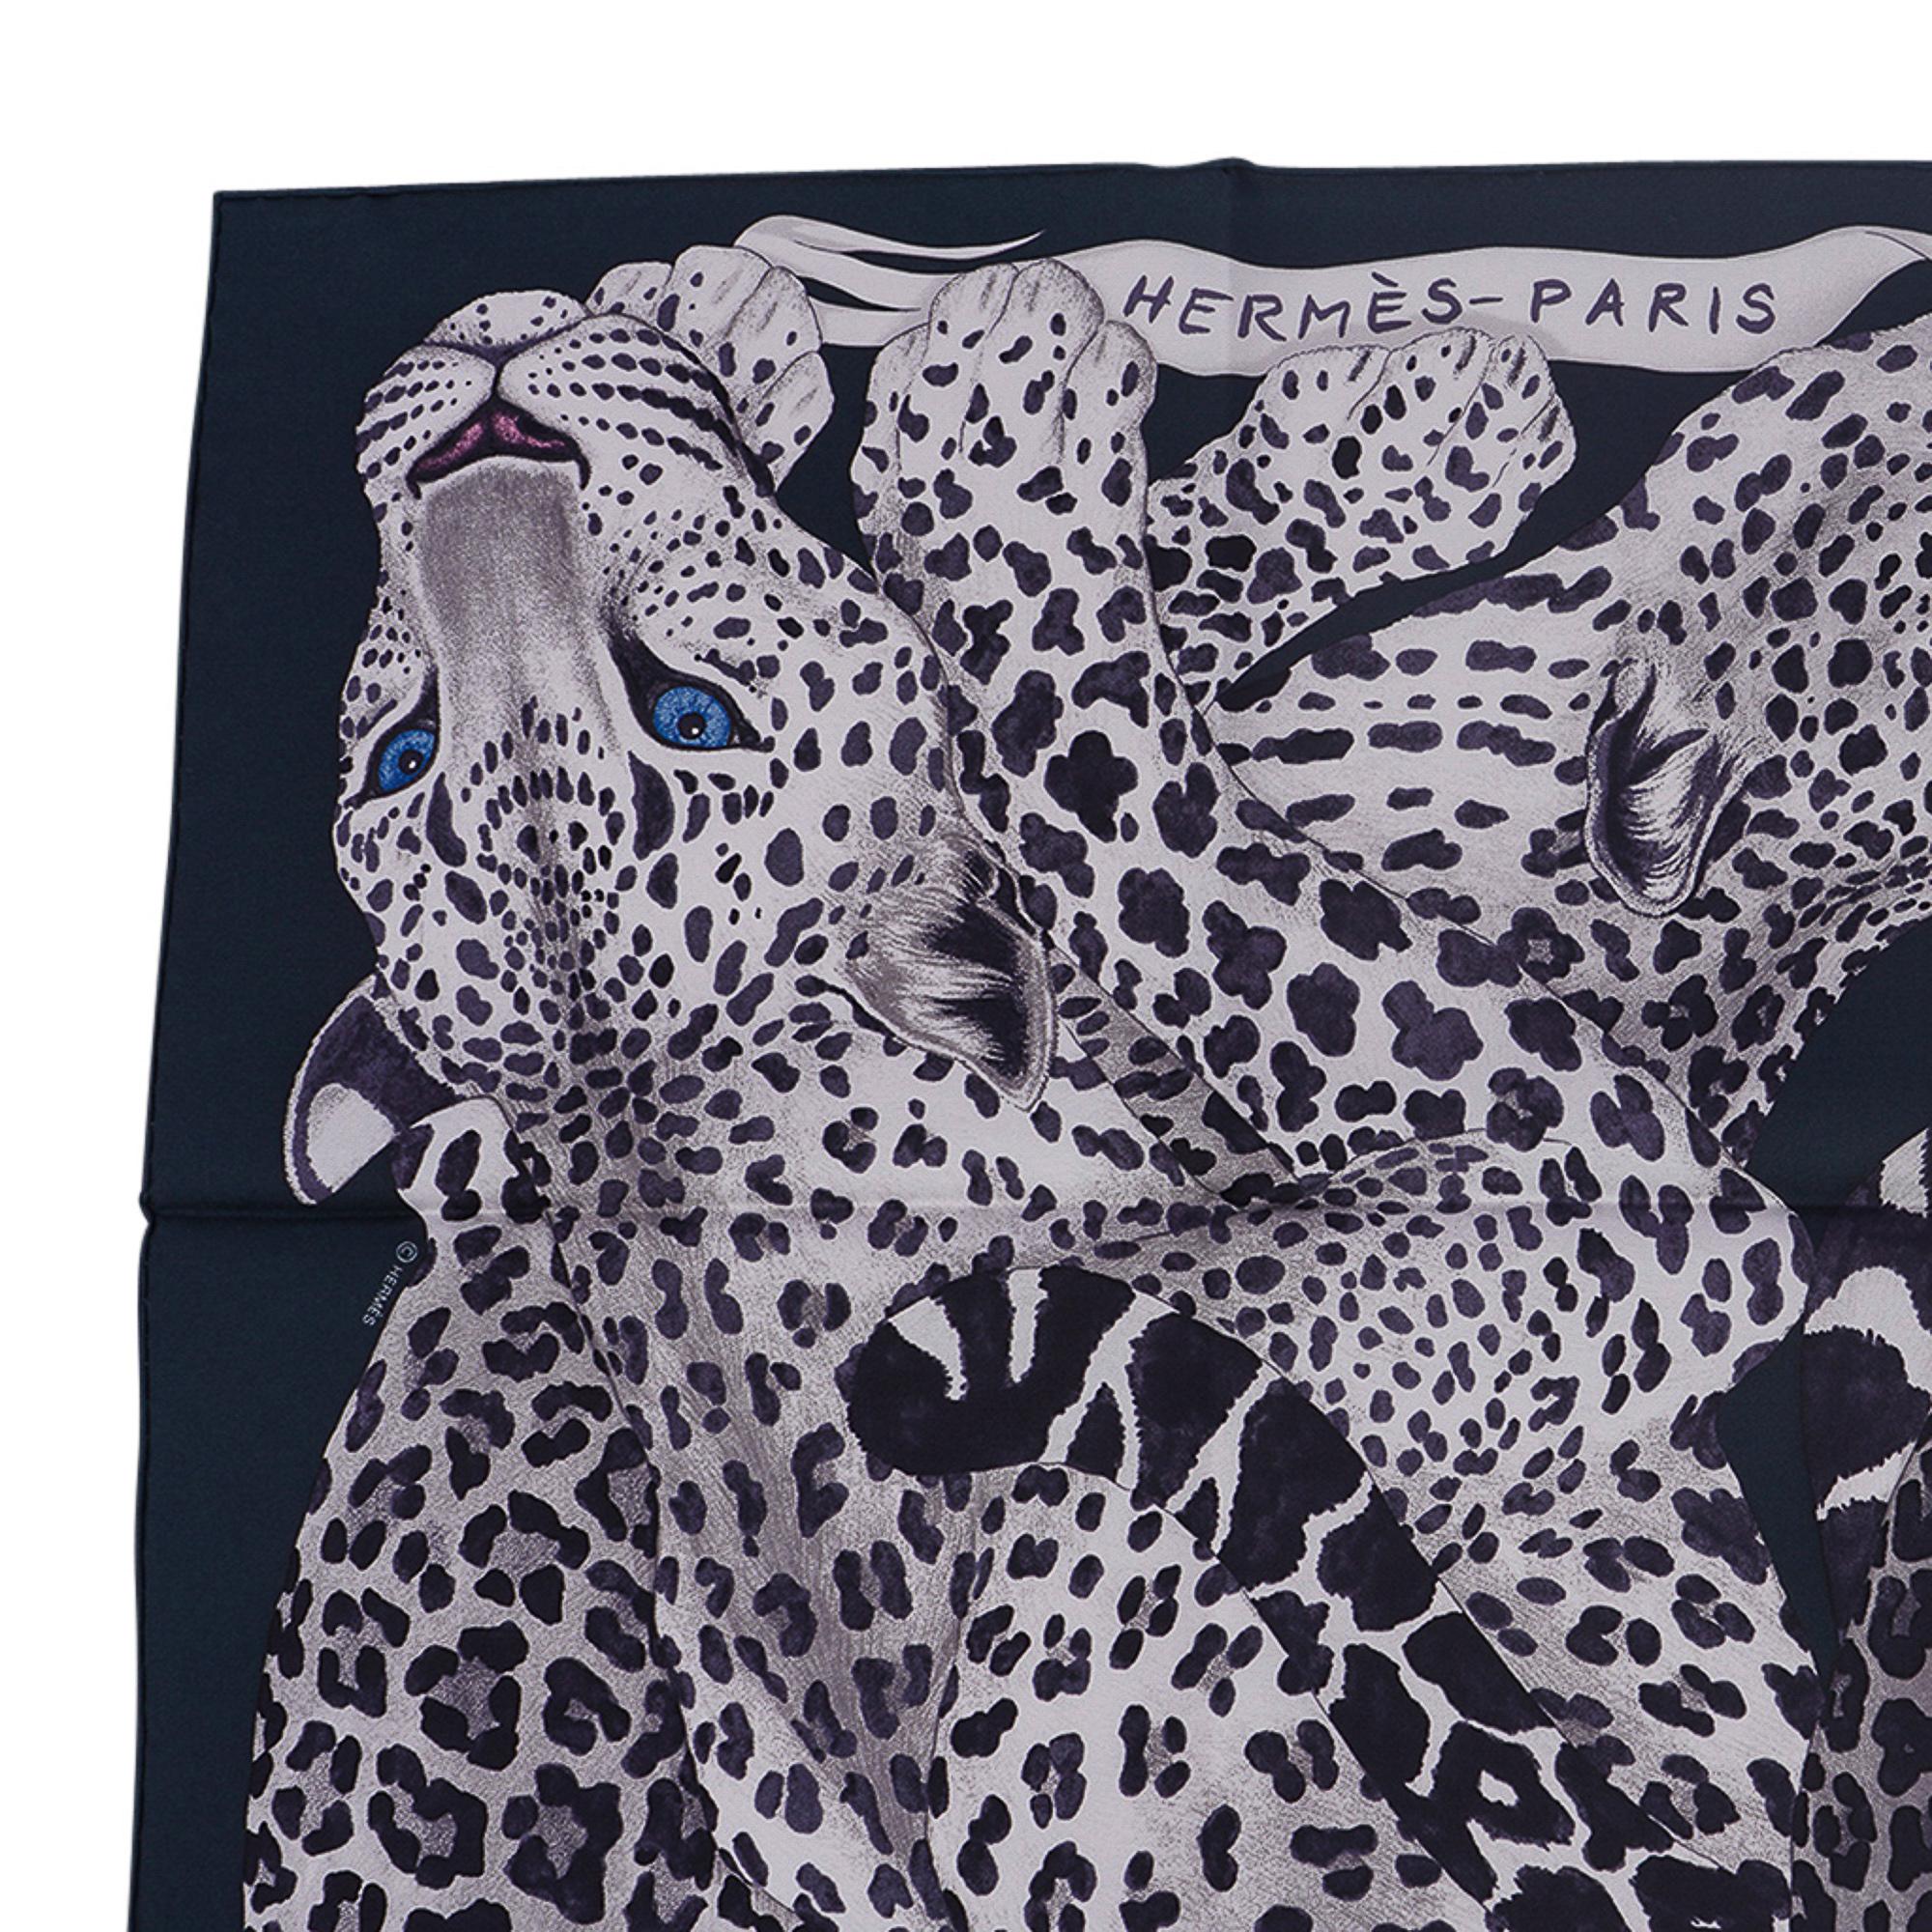 Mightychic offers an Hermes Lazy Leopardesses silk scarf featured in Vert Noir and Gris.
This exquisite Hermes scarf depicts the graceful majesty of felines in rest.
Designed by Arlette Ess.
Signature hand rolled edge.
Comes with signature Hermes